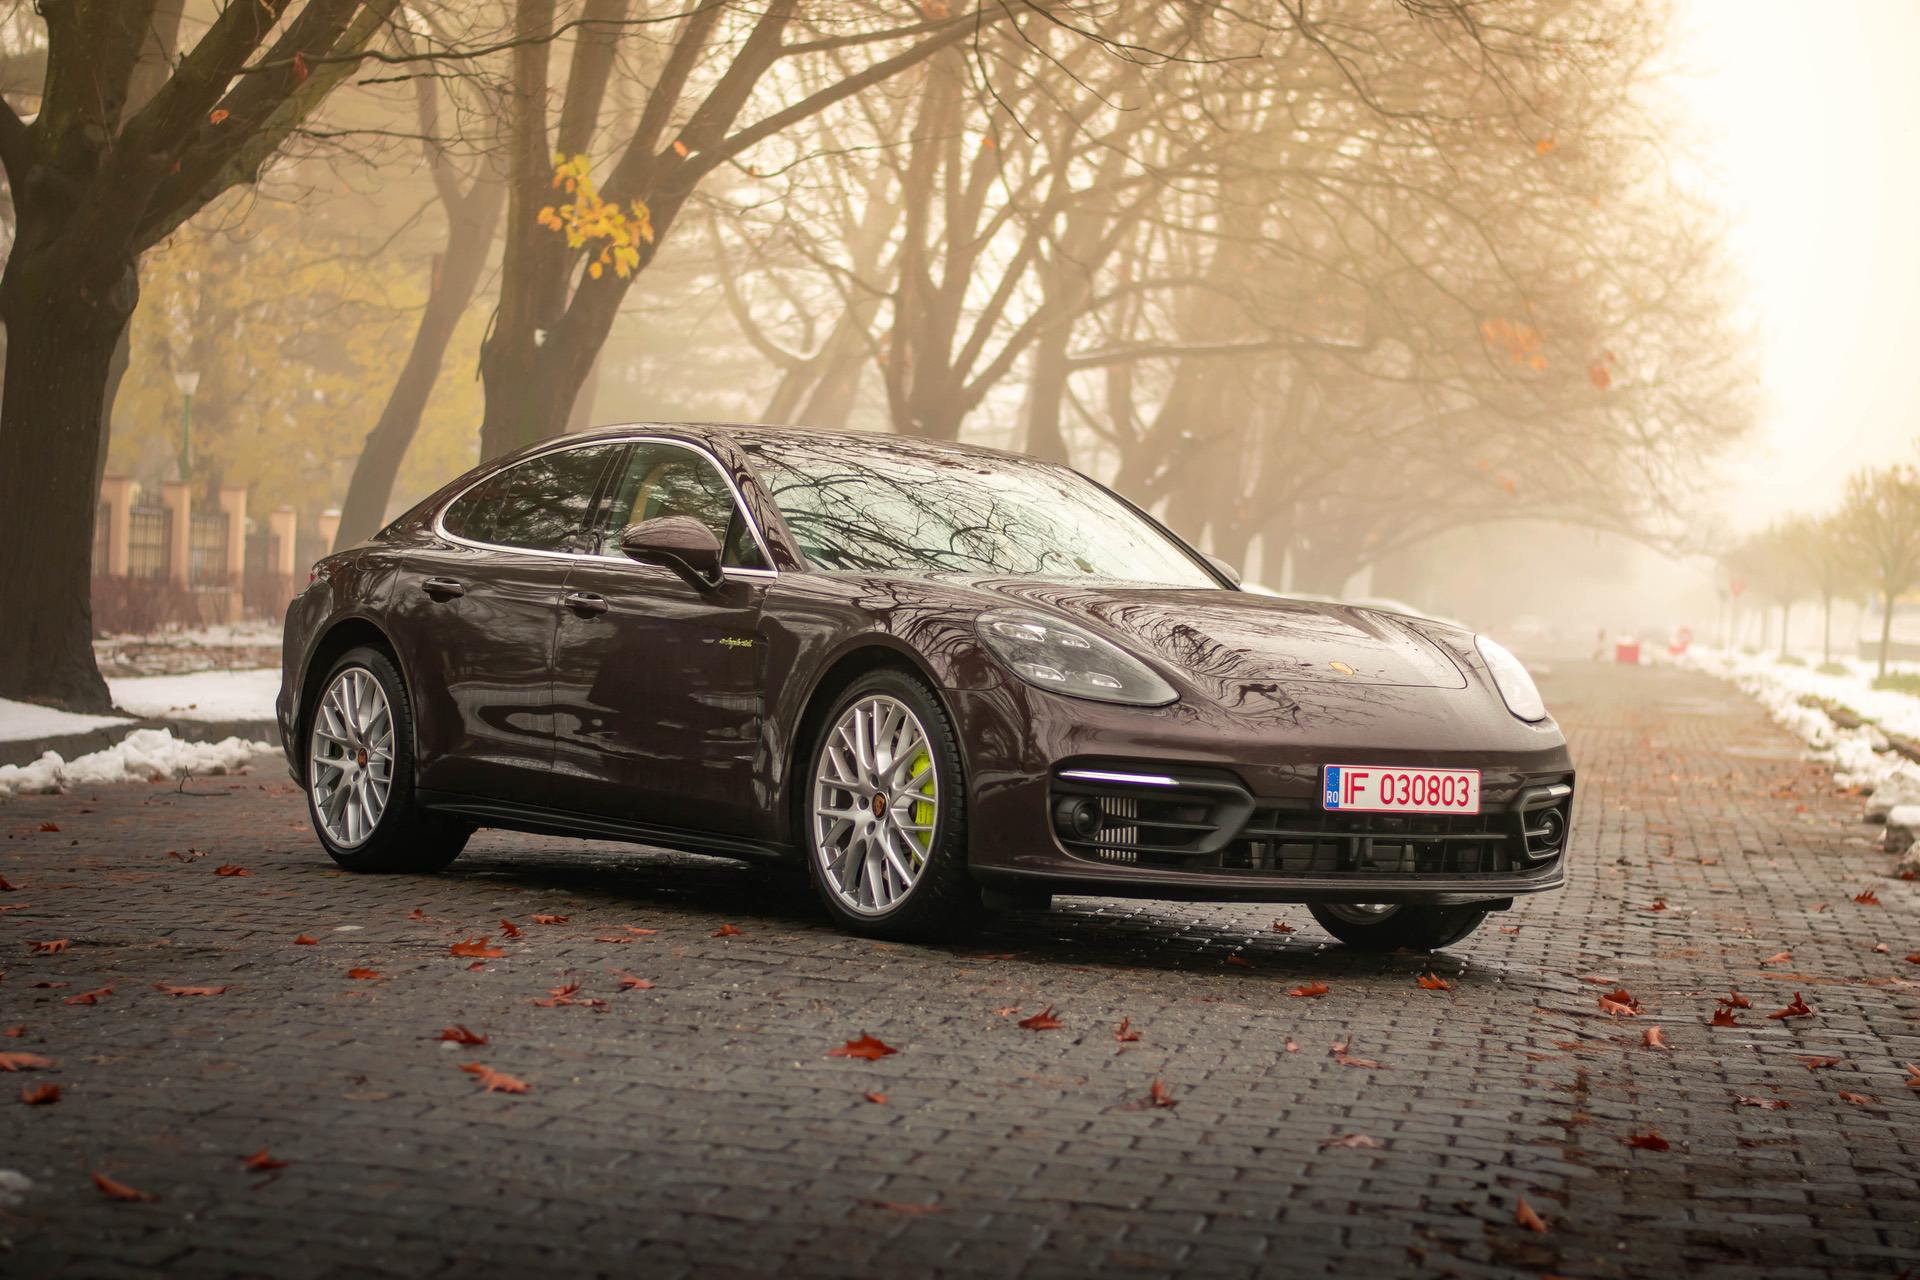 TEST DRIVE: 2021 Porsche Panamera 4S E-Hybrid – The World Is Changing